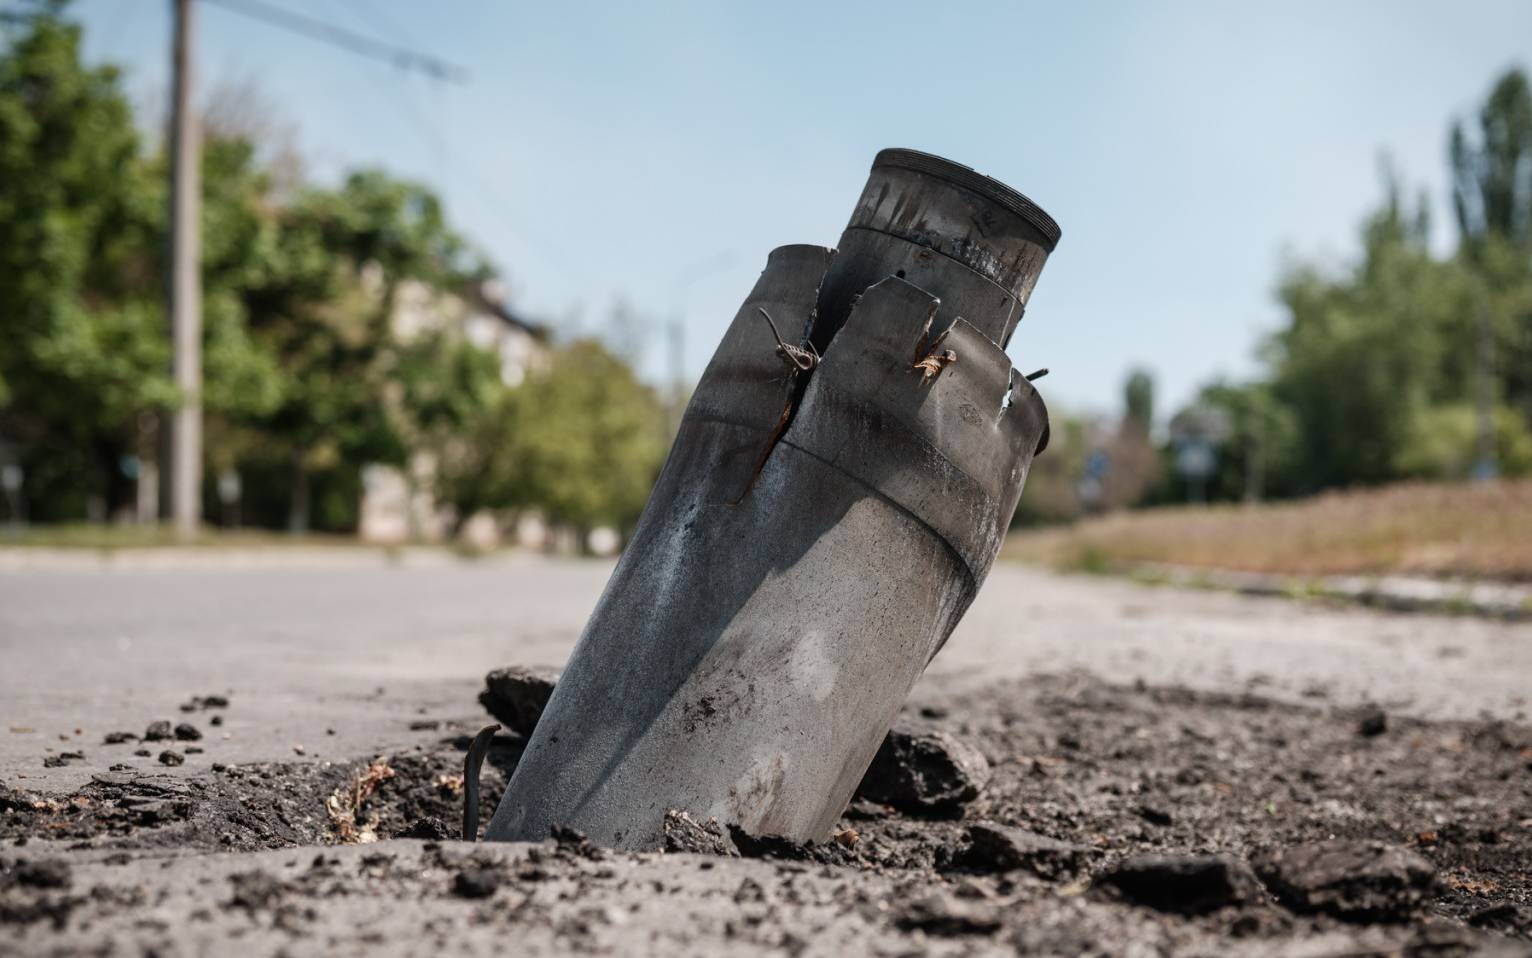 An Unexploded Ordnance (UXO) is pictured on a road in Severodonetsk, eastern Ukraine, on May 7, 2022, amid the Russian invasion of Ukraine. (Photo by Yasuyoshi CHIBA / AFP)